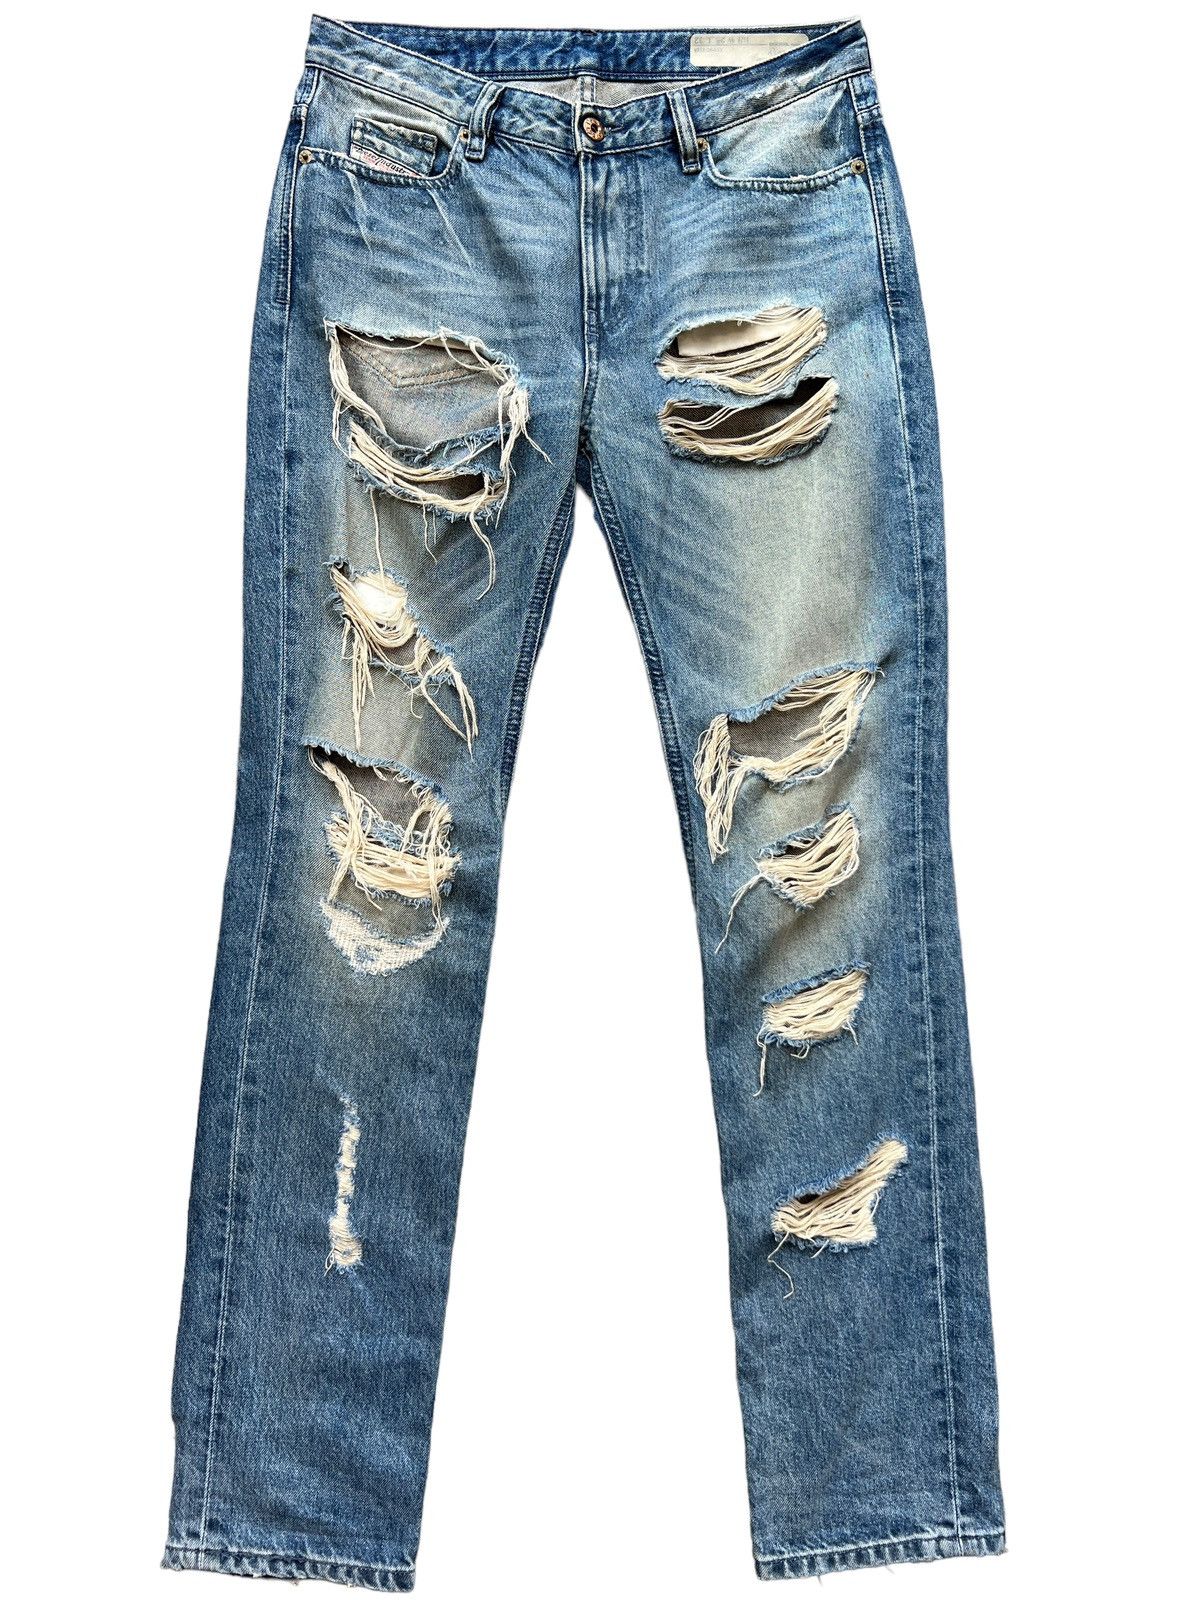 💥Rare💥 Diesel Distressed Ripped Thrashed Denim Jeans 31x31.5 - 2